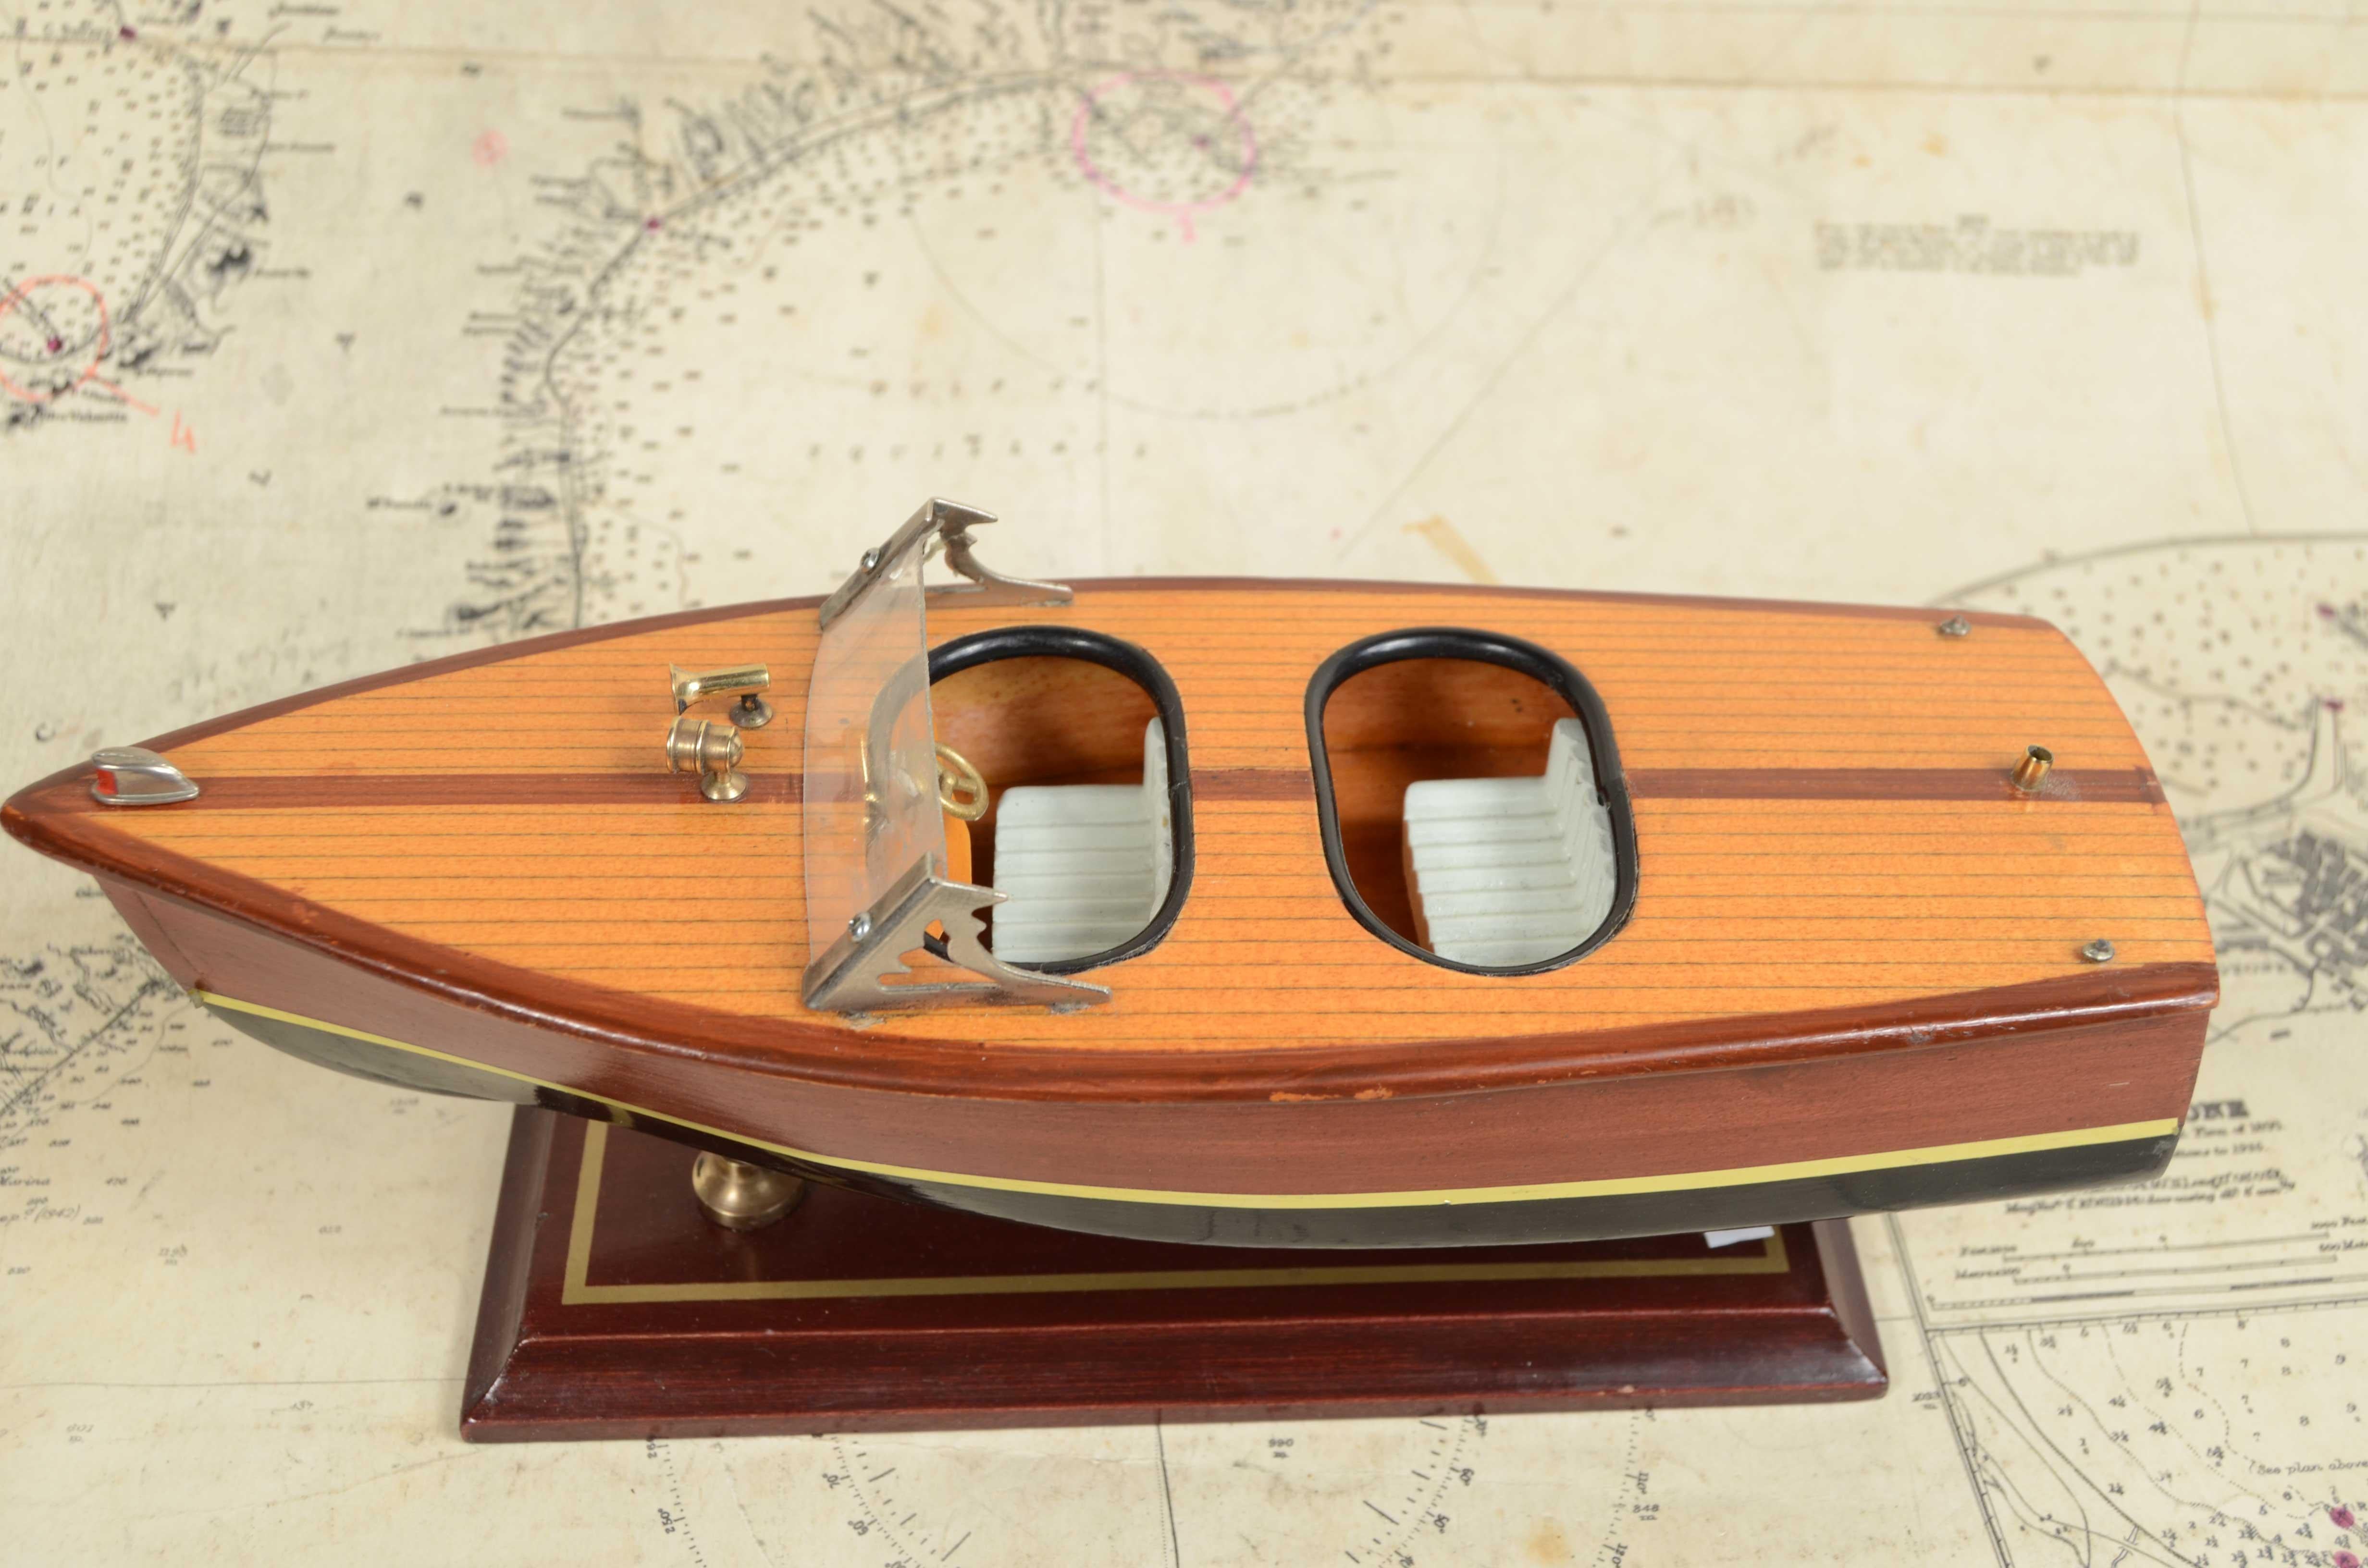 Scale model of an Italian speedboat  1950s, wooden planking hull, mounted on wood and brass base. 
Length cm 25 - inches 9.8, width cm 8.8 - inches 3.4, height with base cm 8.5 - inches 3.4. Bon état. 
Il modellismo navale nasce per motivi